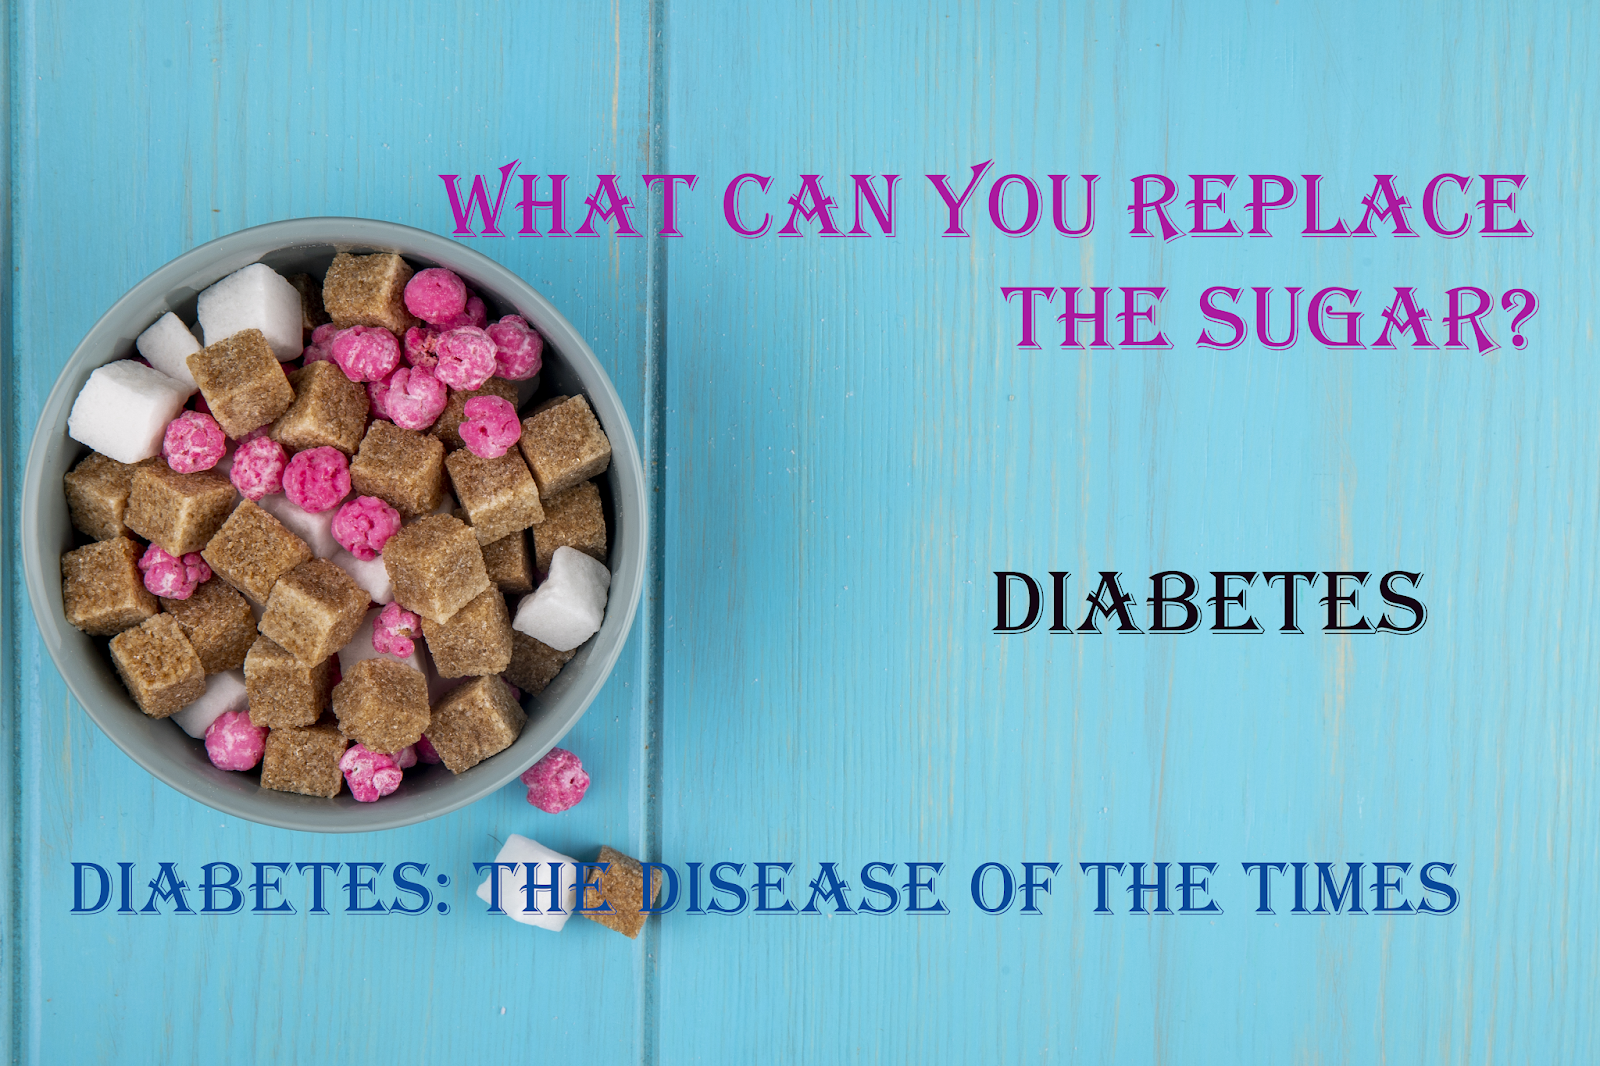 Diabetes: What can you replace the sugar?